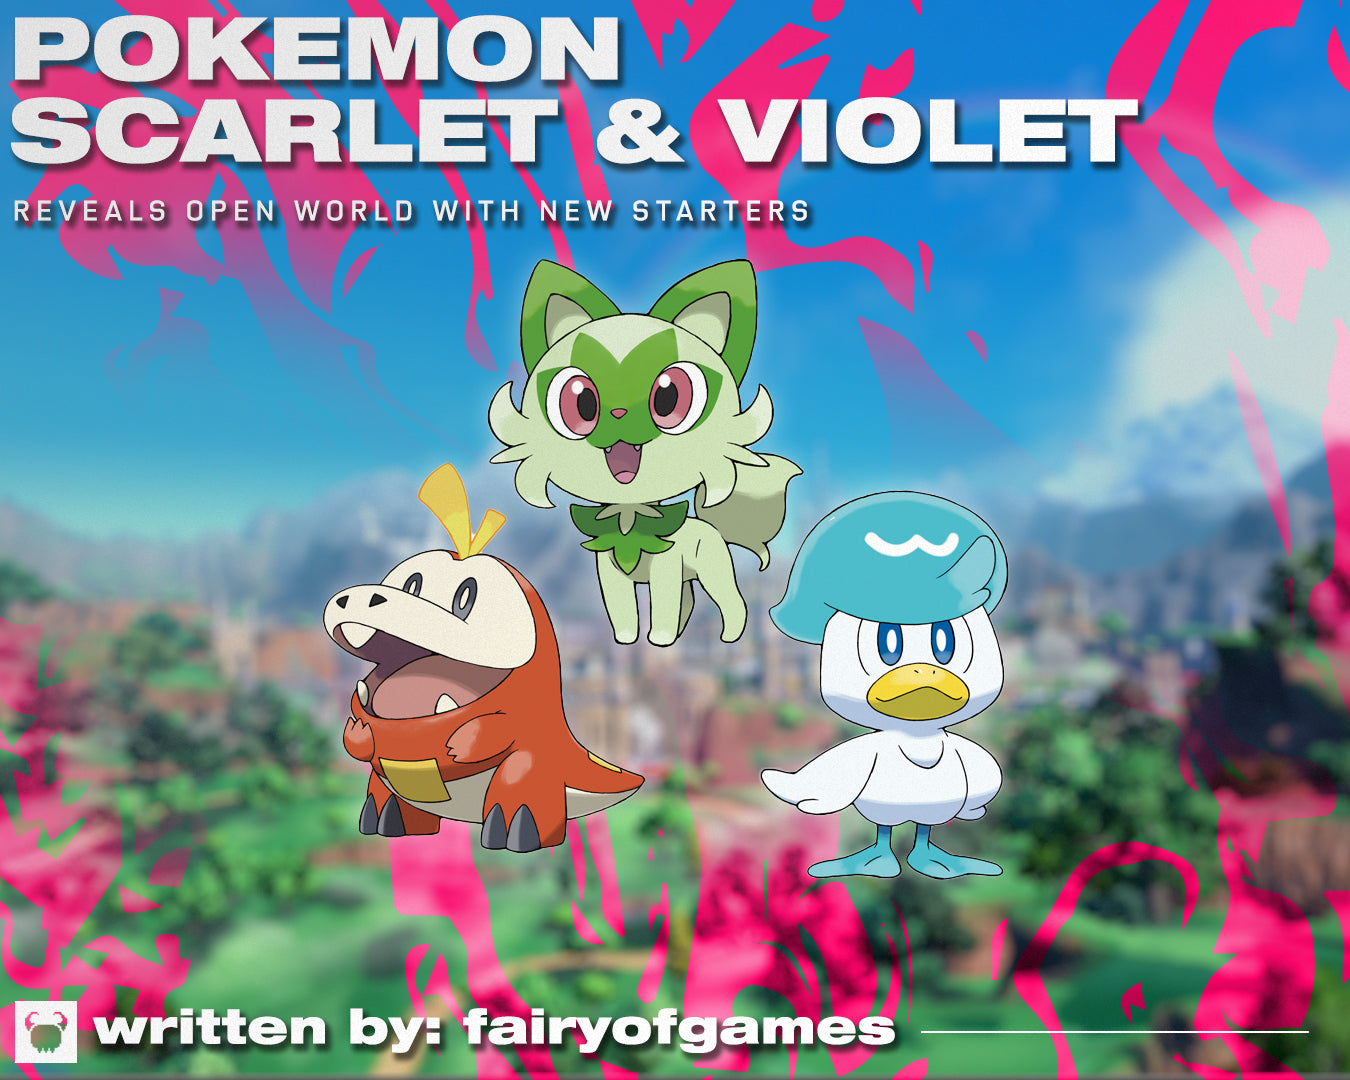 New Pokémon 'Scarlet' and 'Violet' trailer reveals new monsters